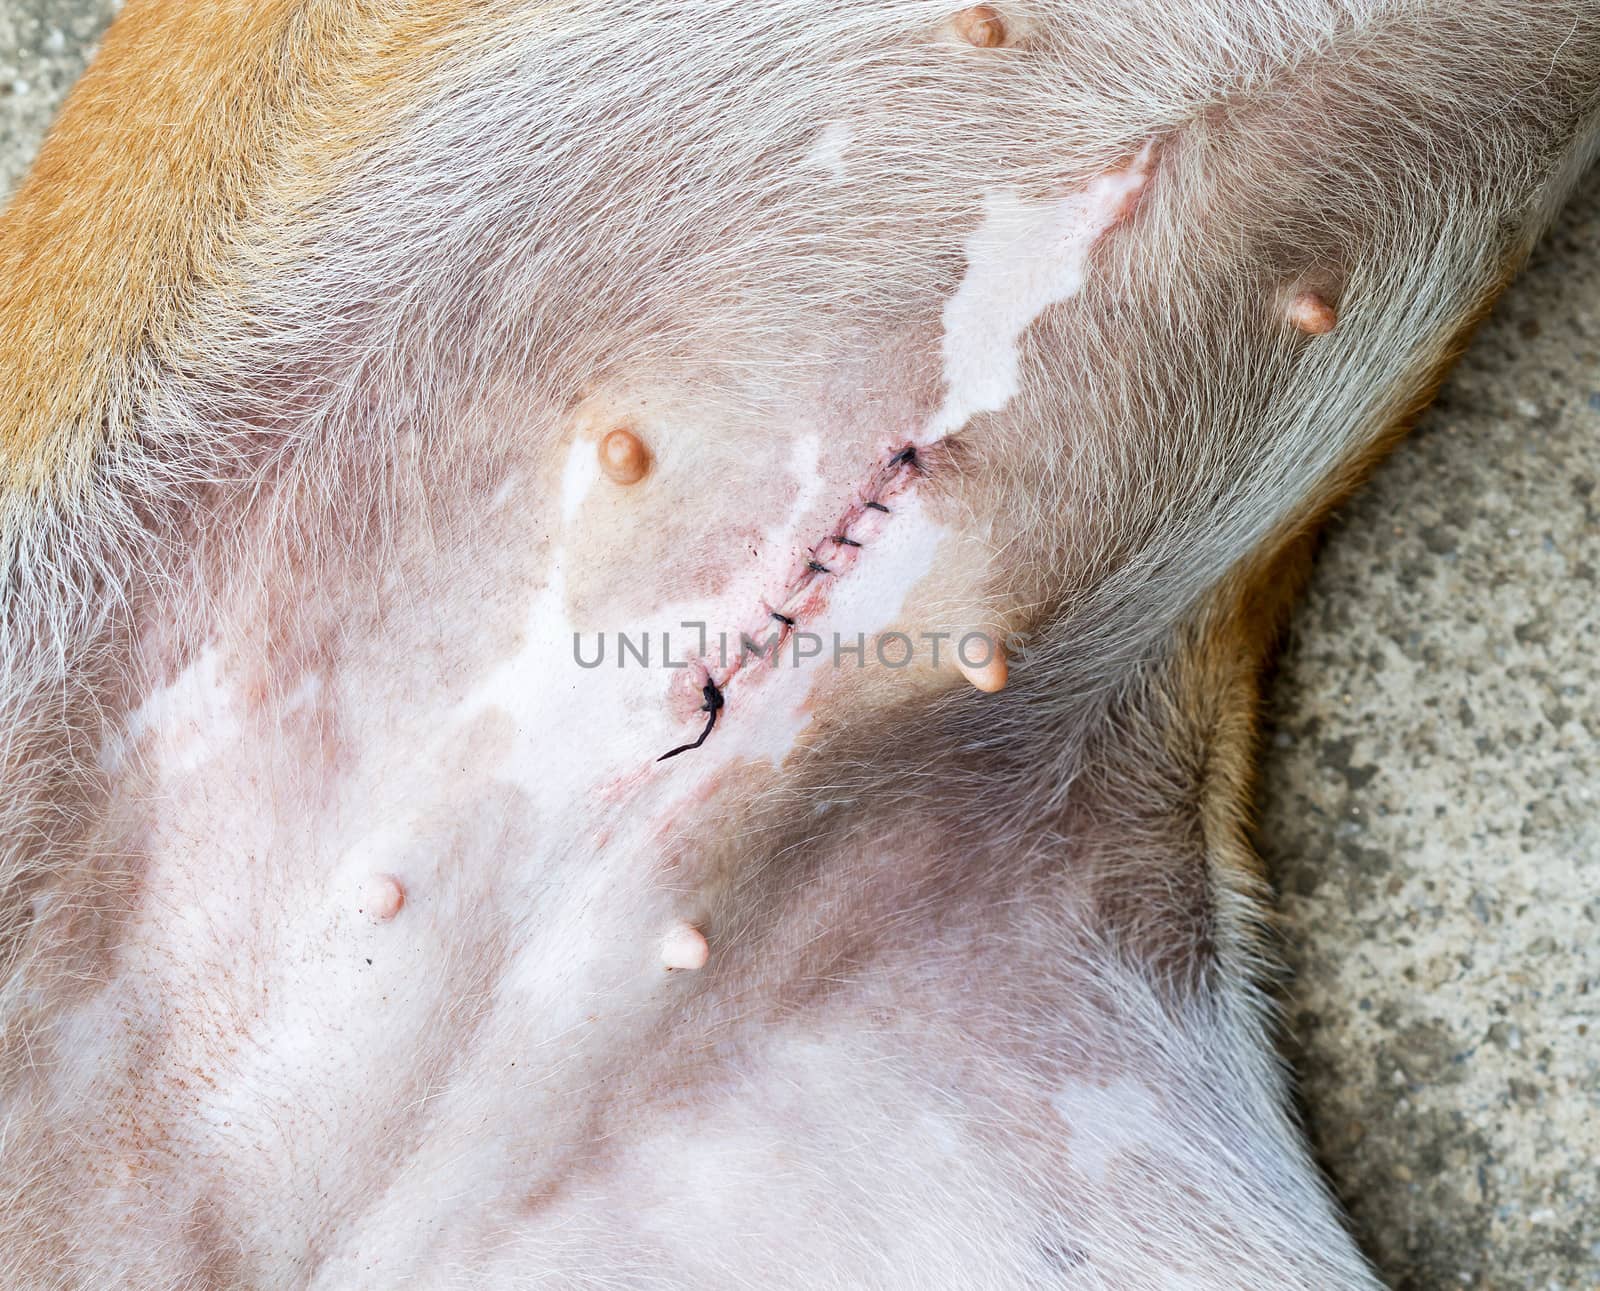 Normal wound after spaying female dog